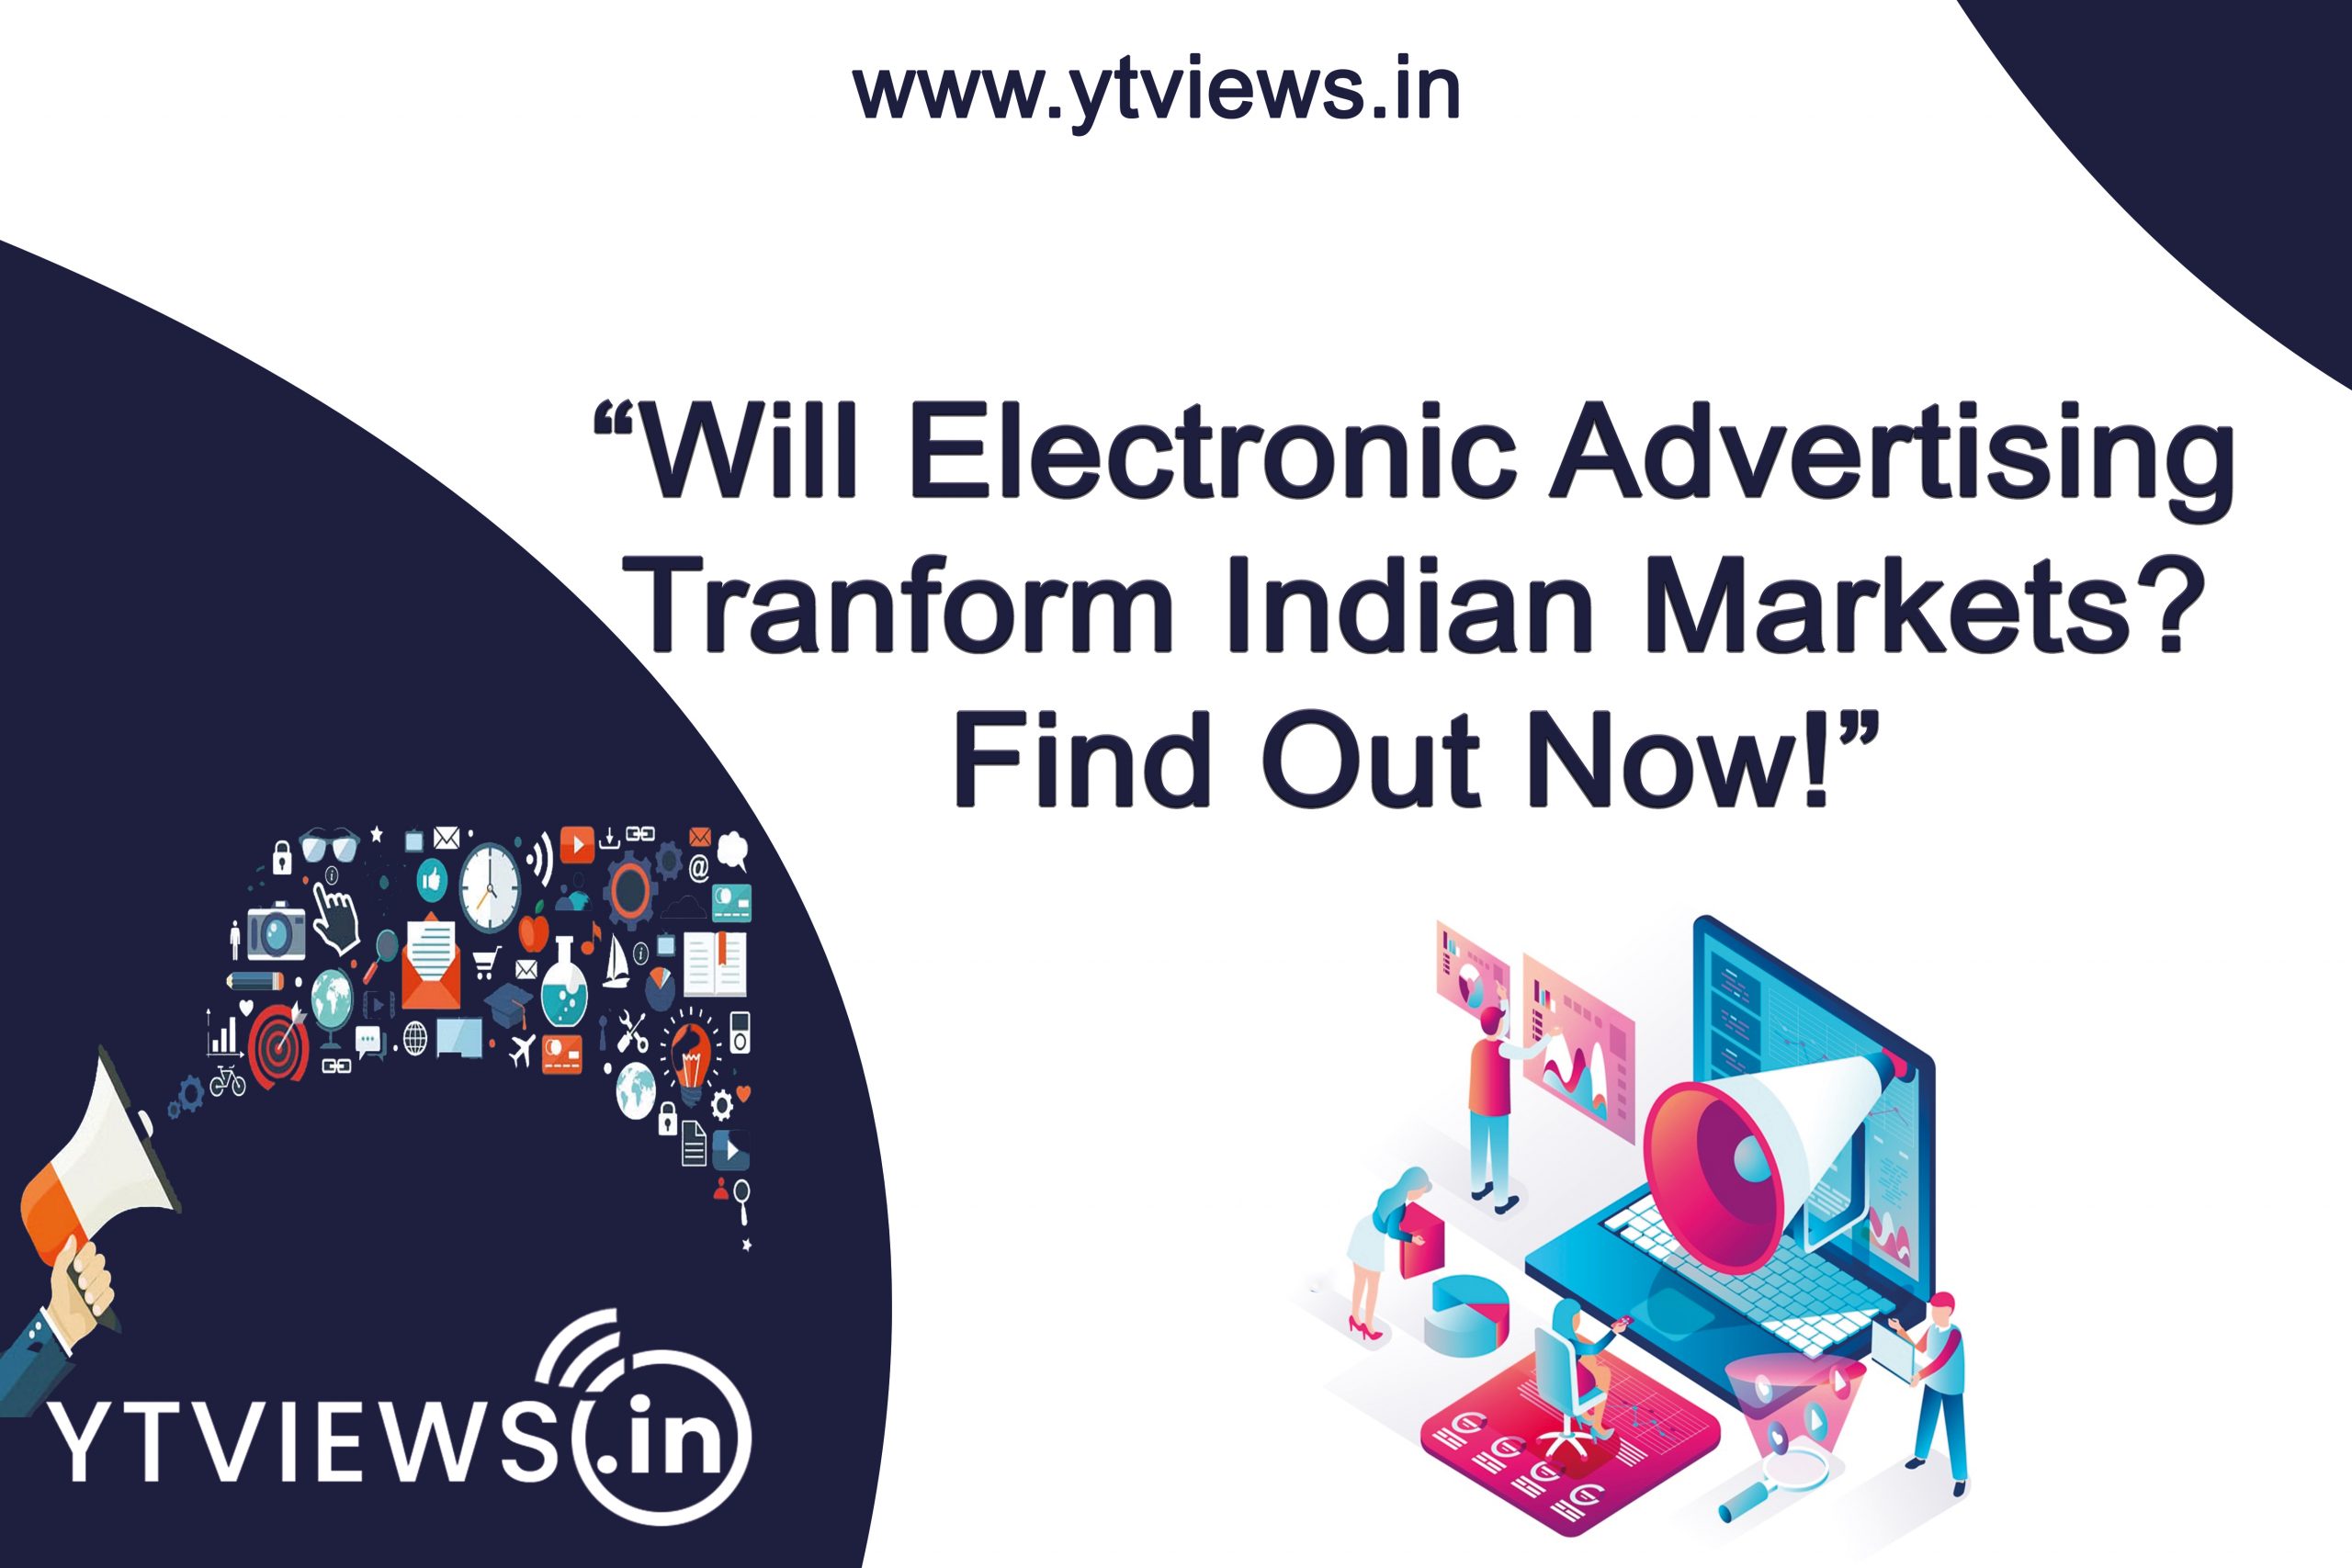 “Will Electronic Advertising Transform Indian Markets? Find Out Now!”